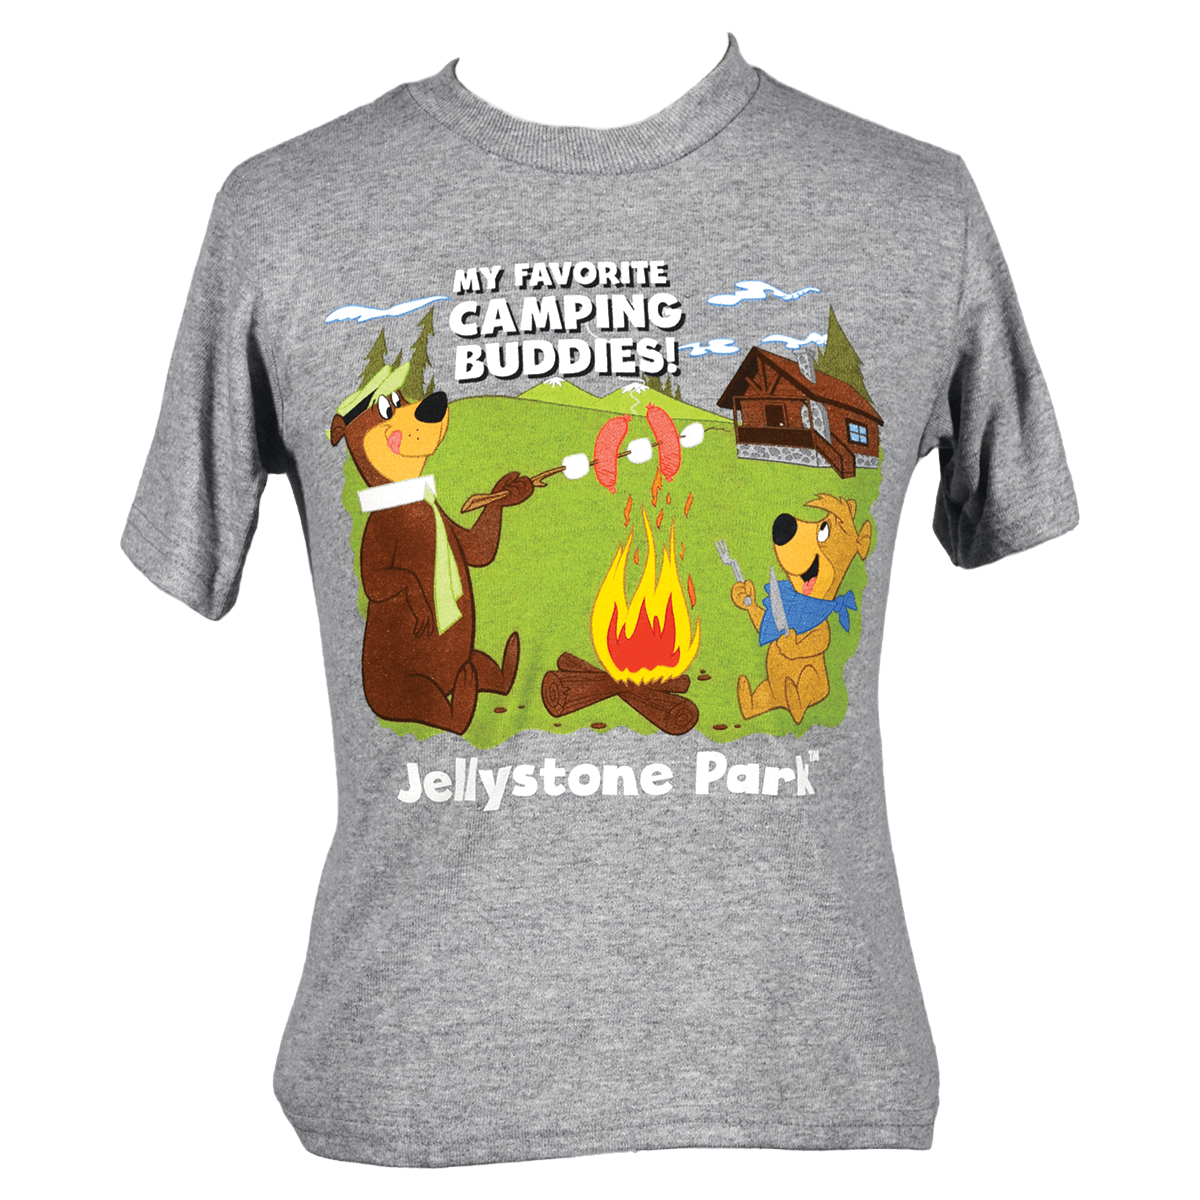 Jellystone Park Camping Buddies Infant T-Shirt (2T)